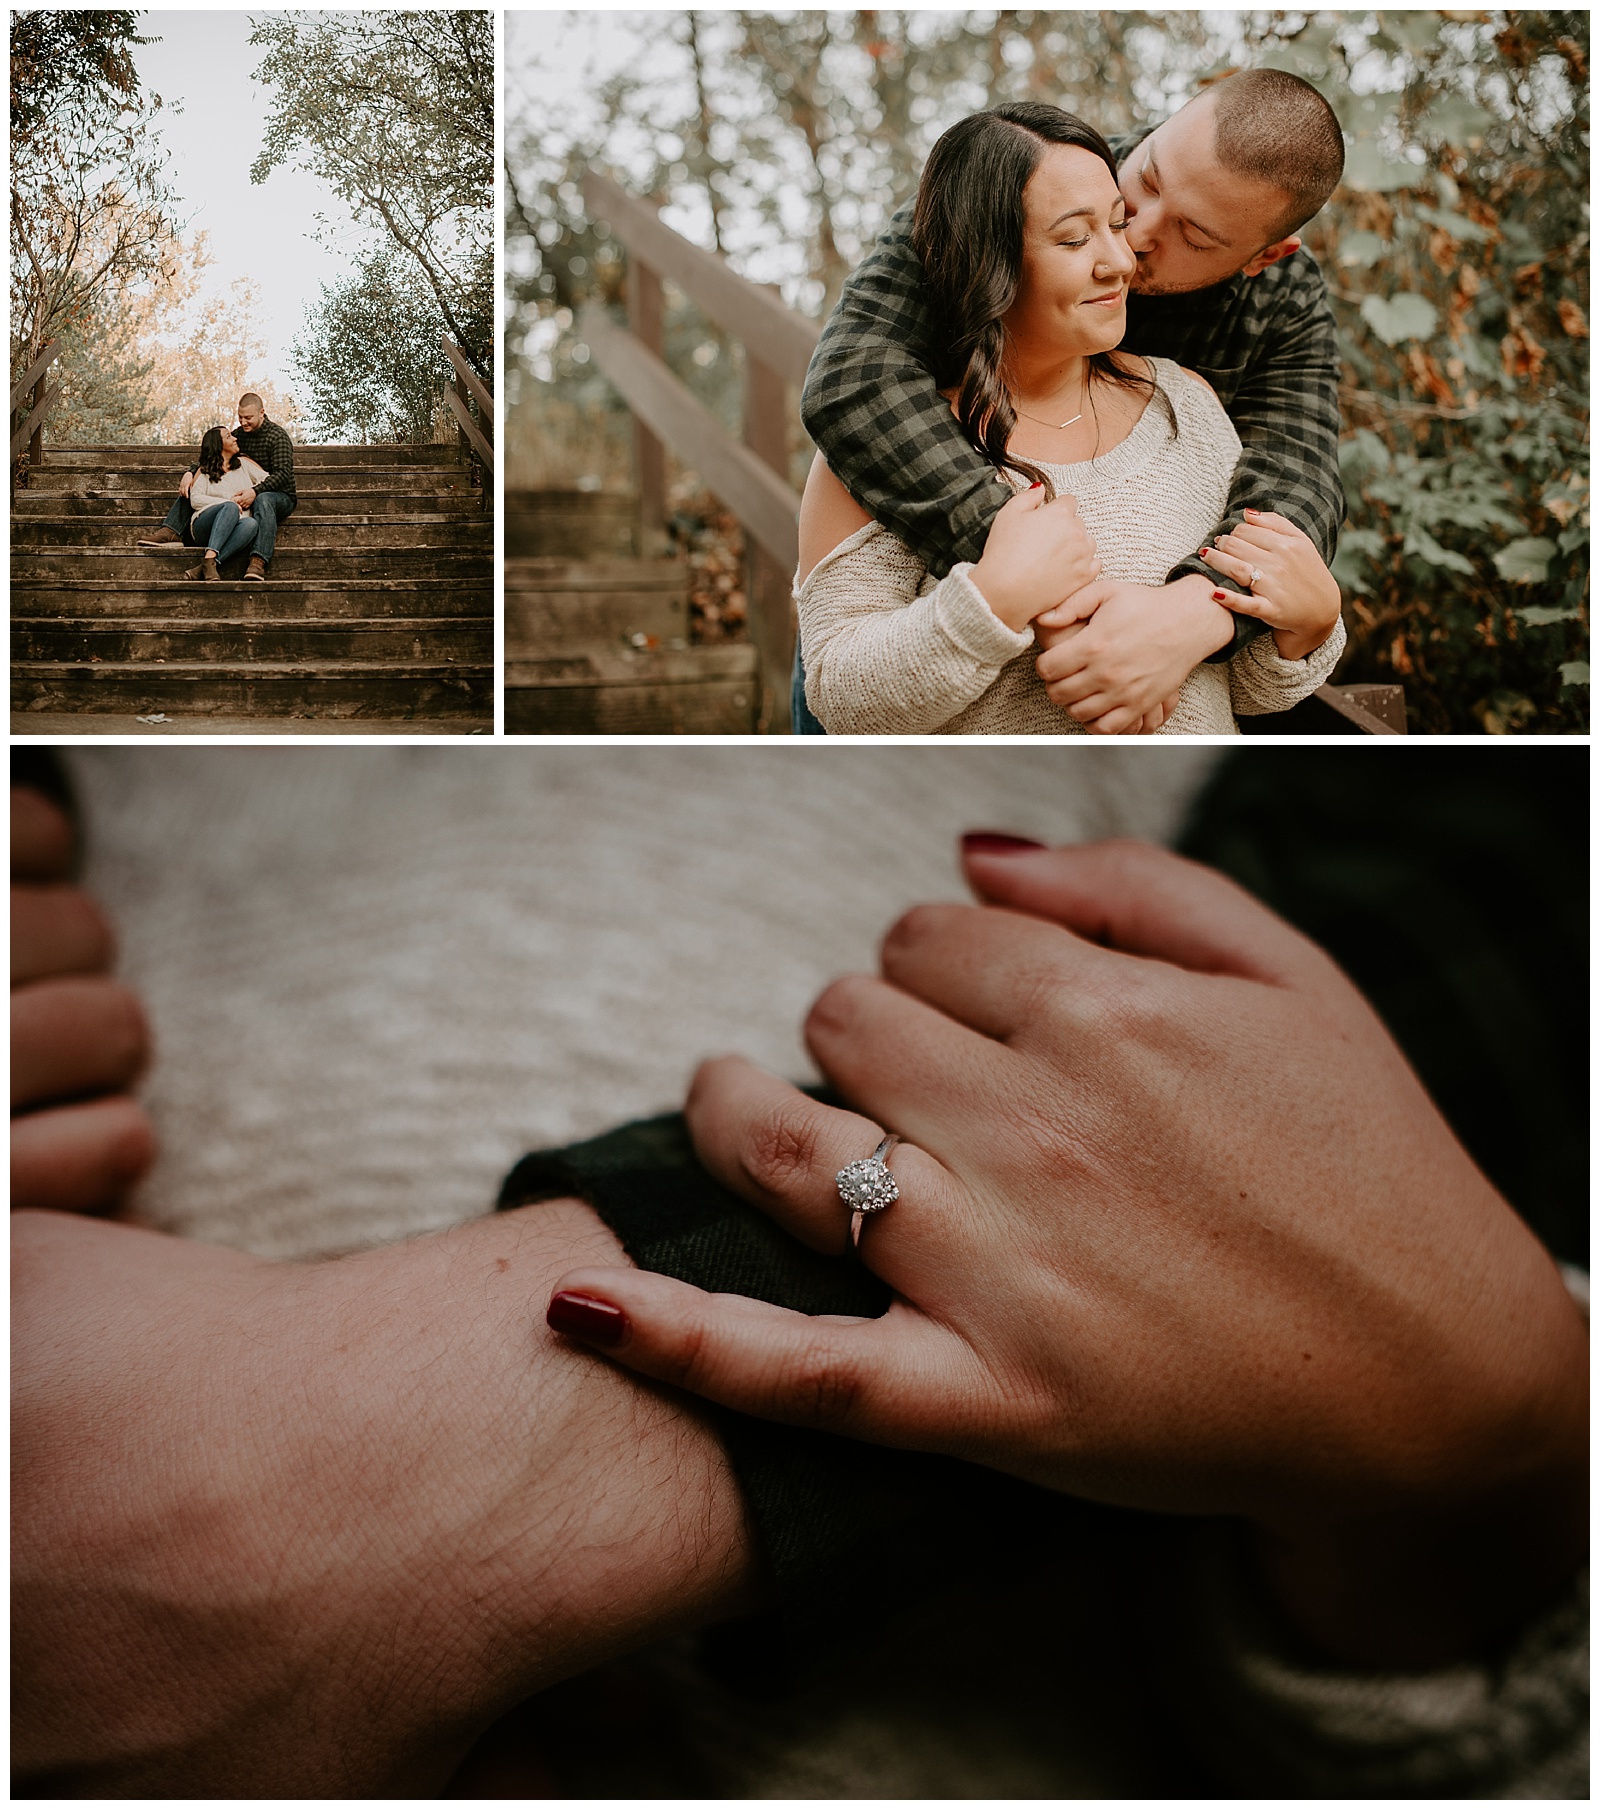 Engagement Ring Photographer in Michigan